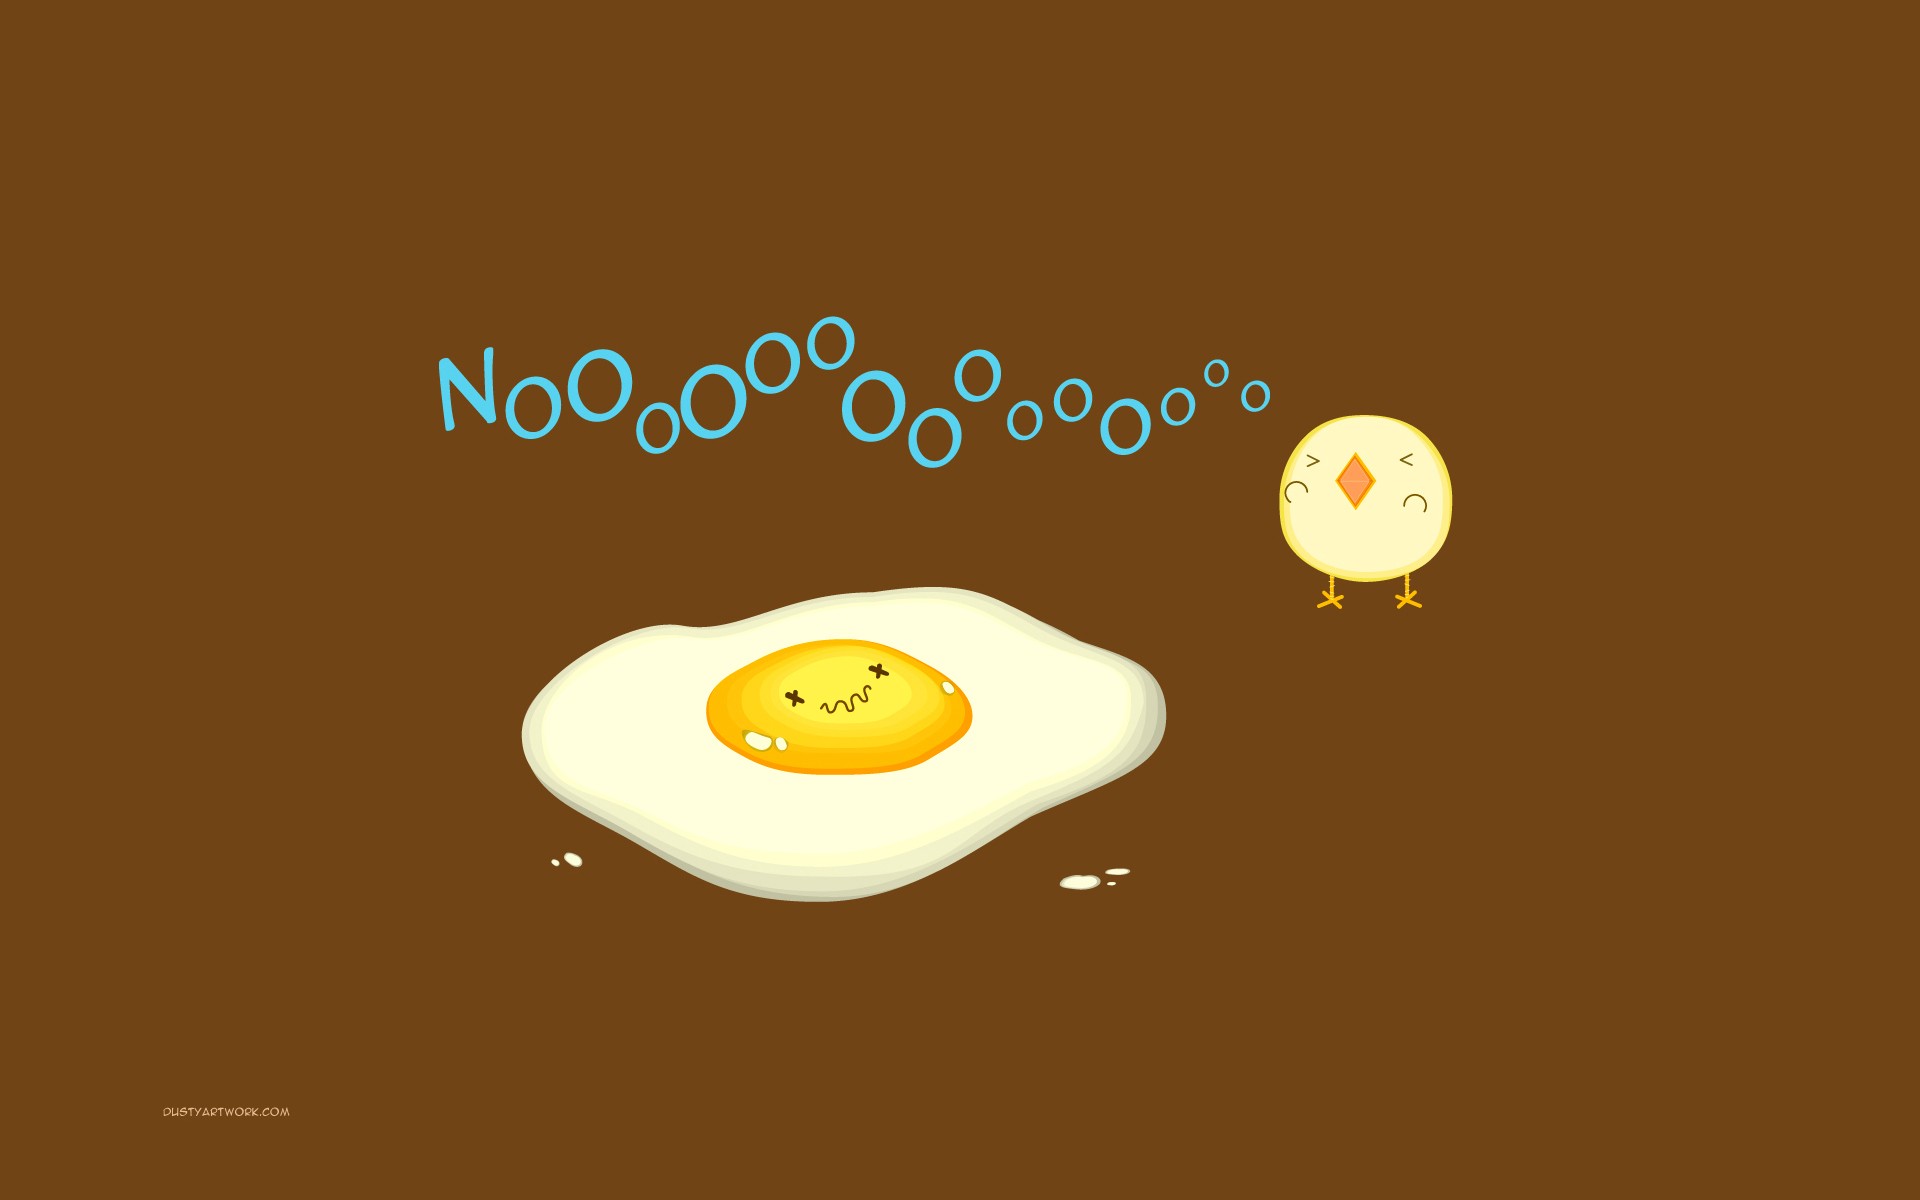 eggs, Minimalistic, Humor, Funny, Chickens, Fried, Eggs Wallpaper HD / Desktop and Mobile Background